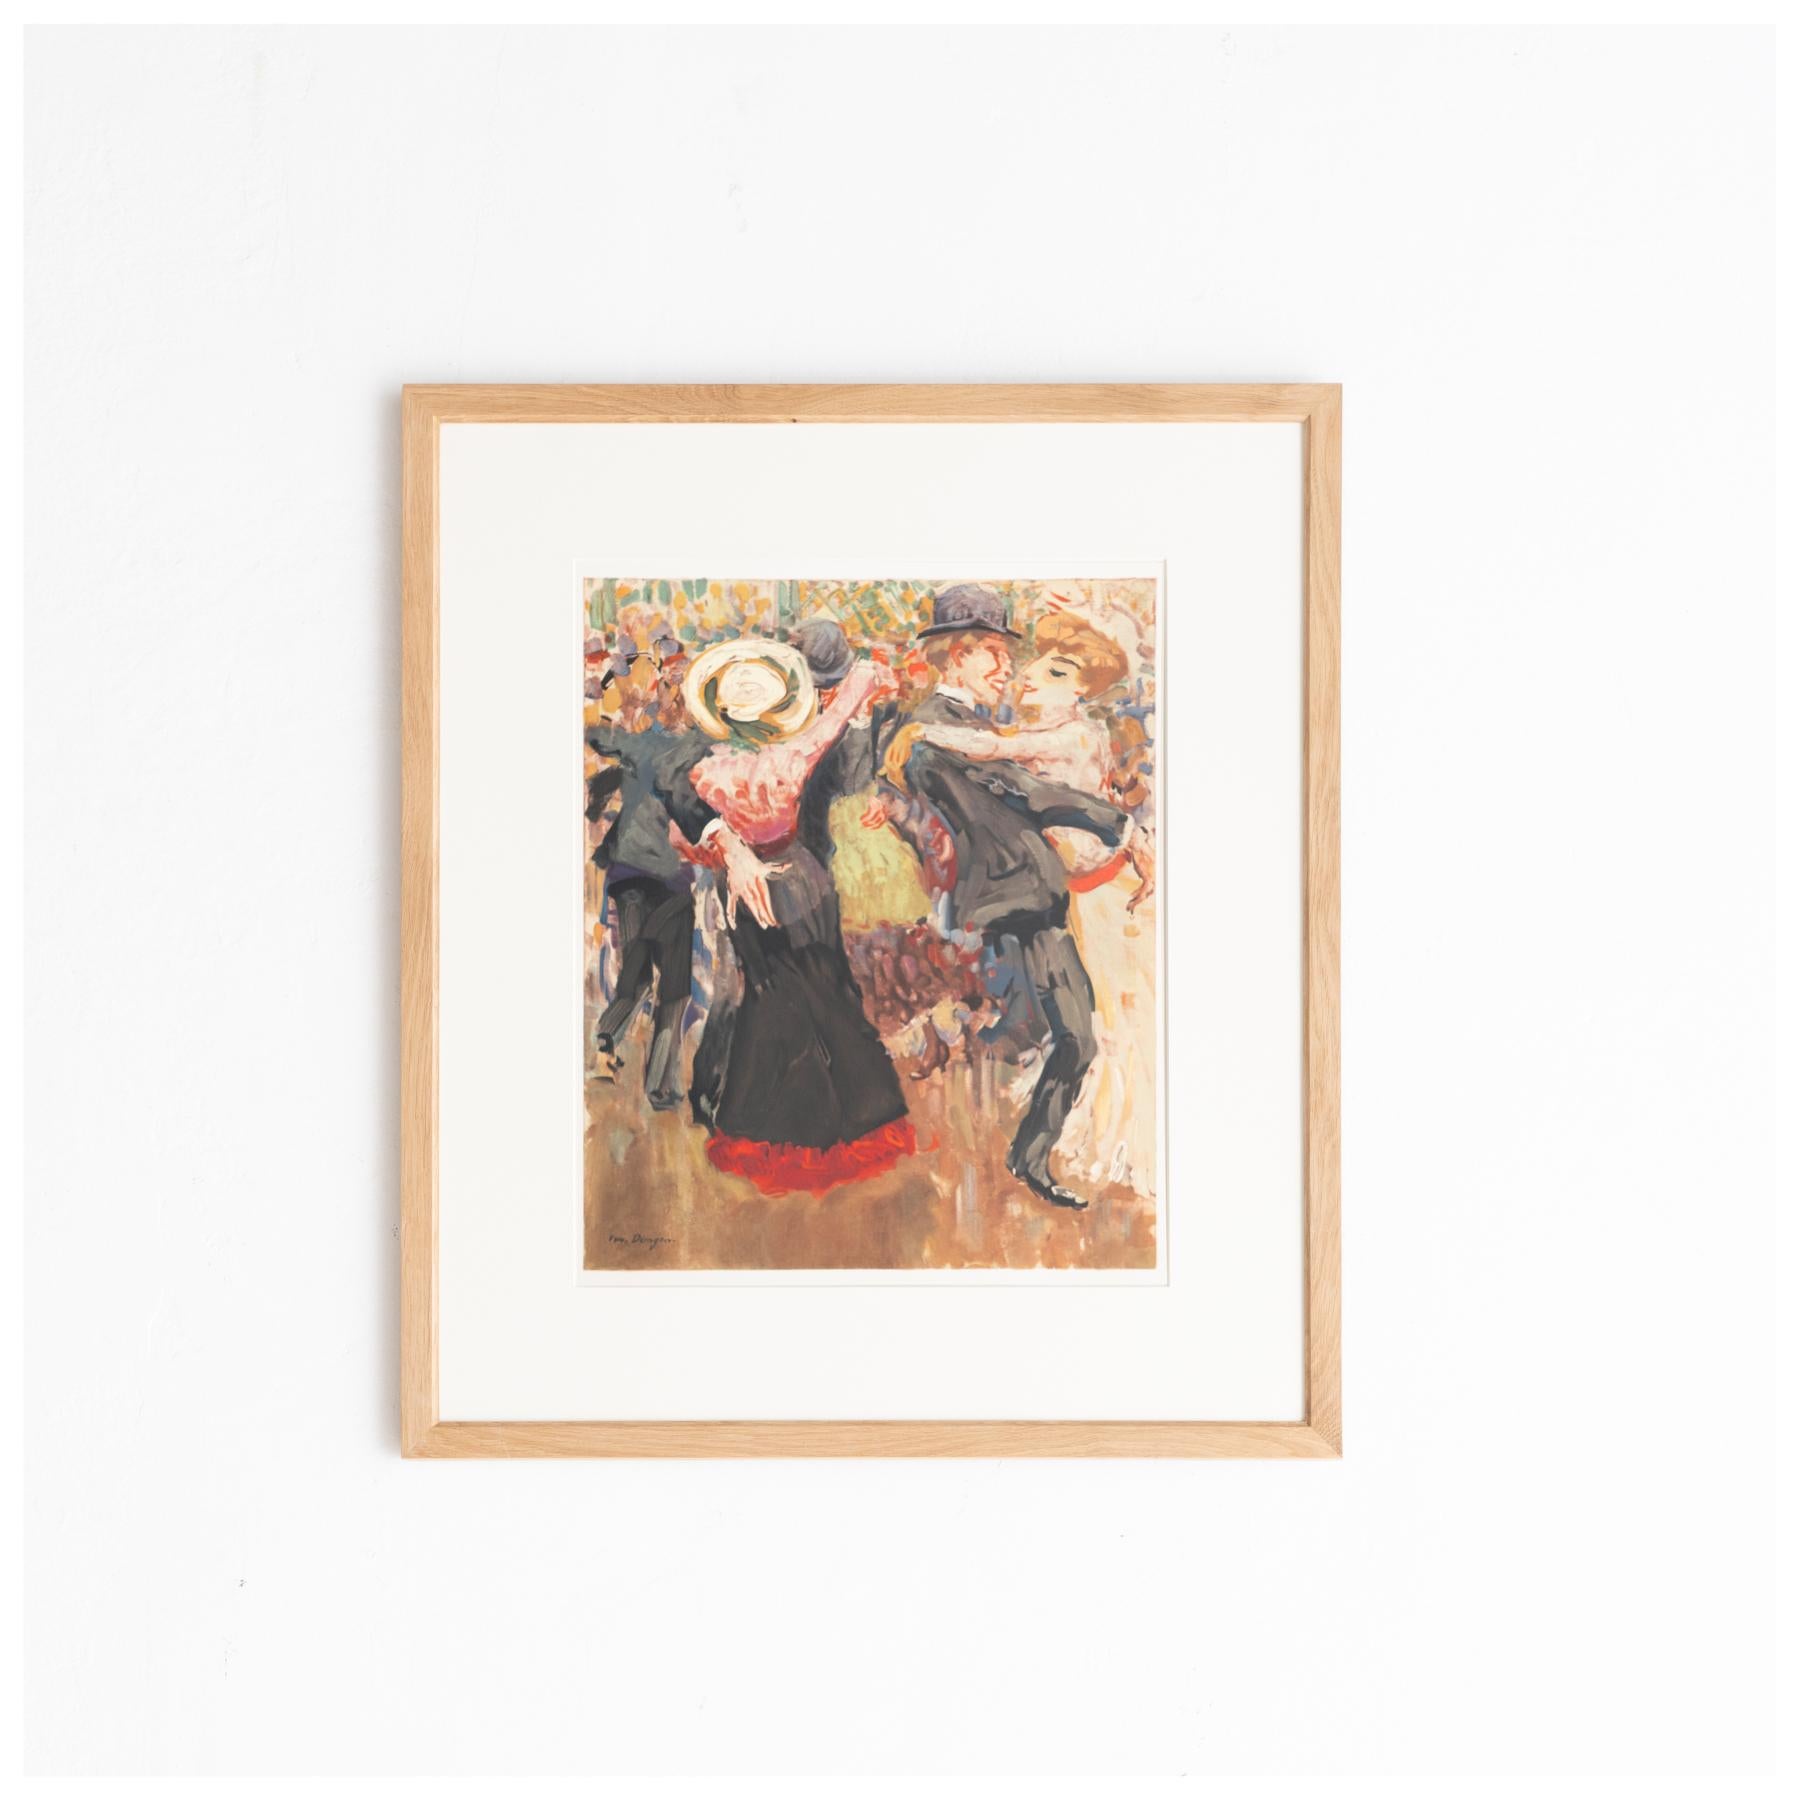 Lithograph 'Le Matchiche' by Kees van Donguen

Lithograph printed from an original painting made by the author in France, circa 1906.

Published in Paris 1972 in Les Fauves Collection for Michel Hoog.

Framed and signed in the stone.

In